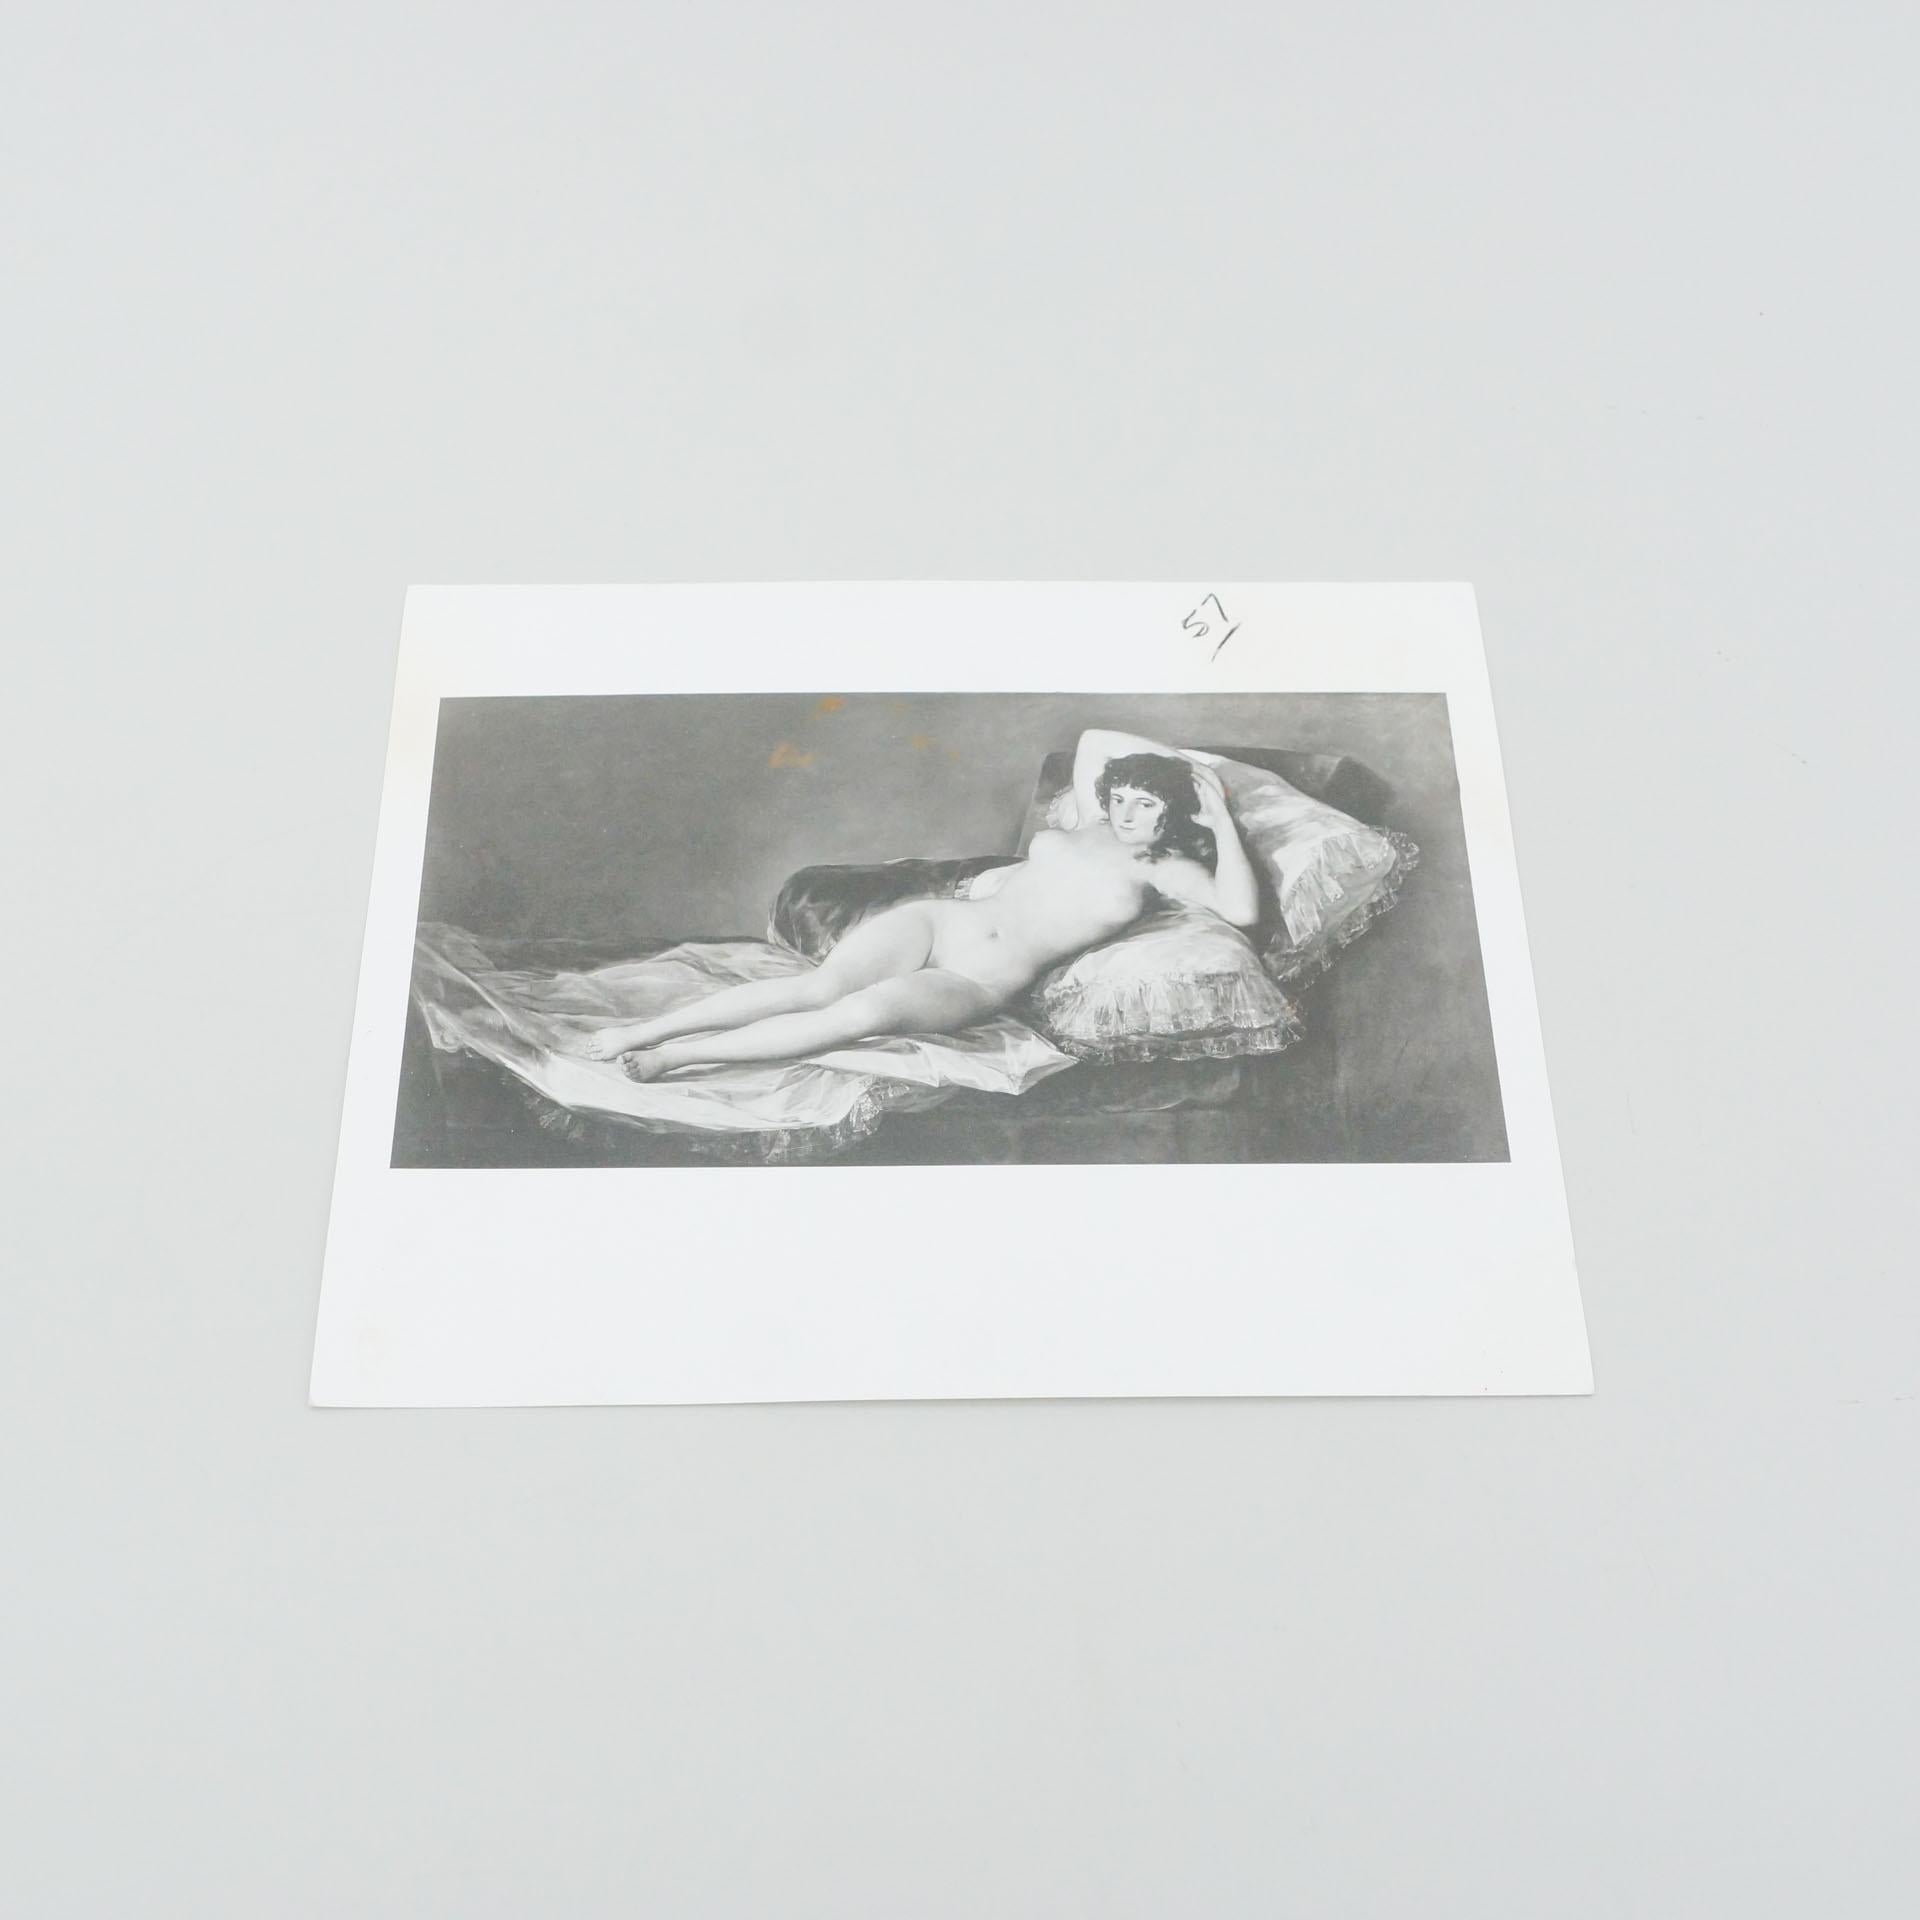 Black and white archive photography of goya 'The Naked Maja', by National Gallery of Art, Washington D.C , 1976.

In original condition, with minor wear consistent with age and use, preserving a beautiful